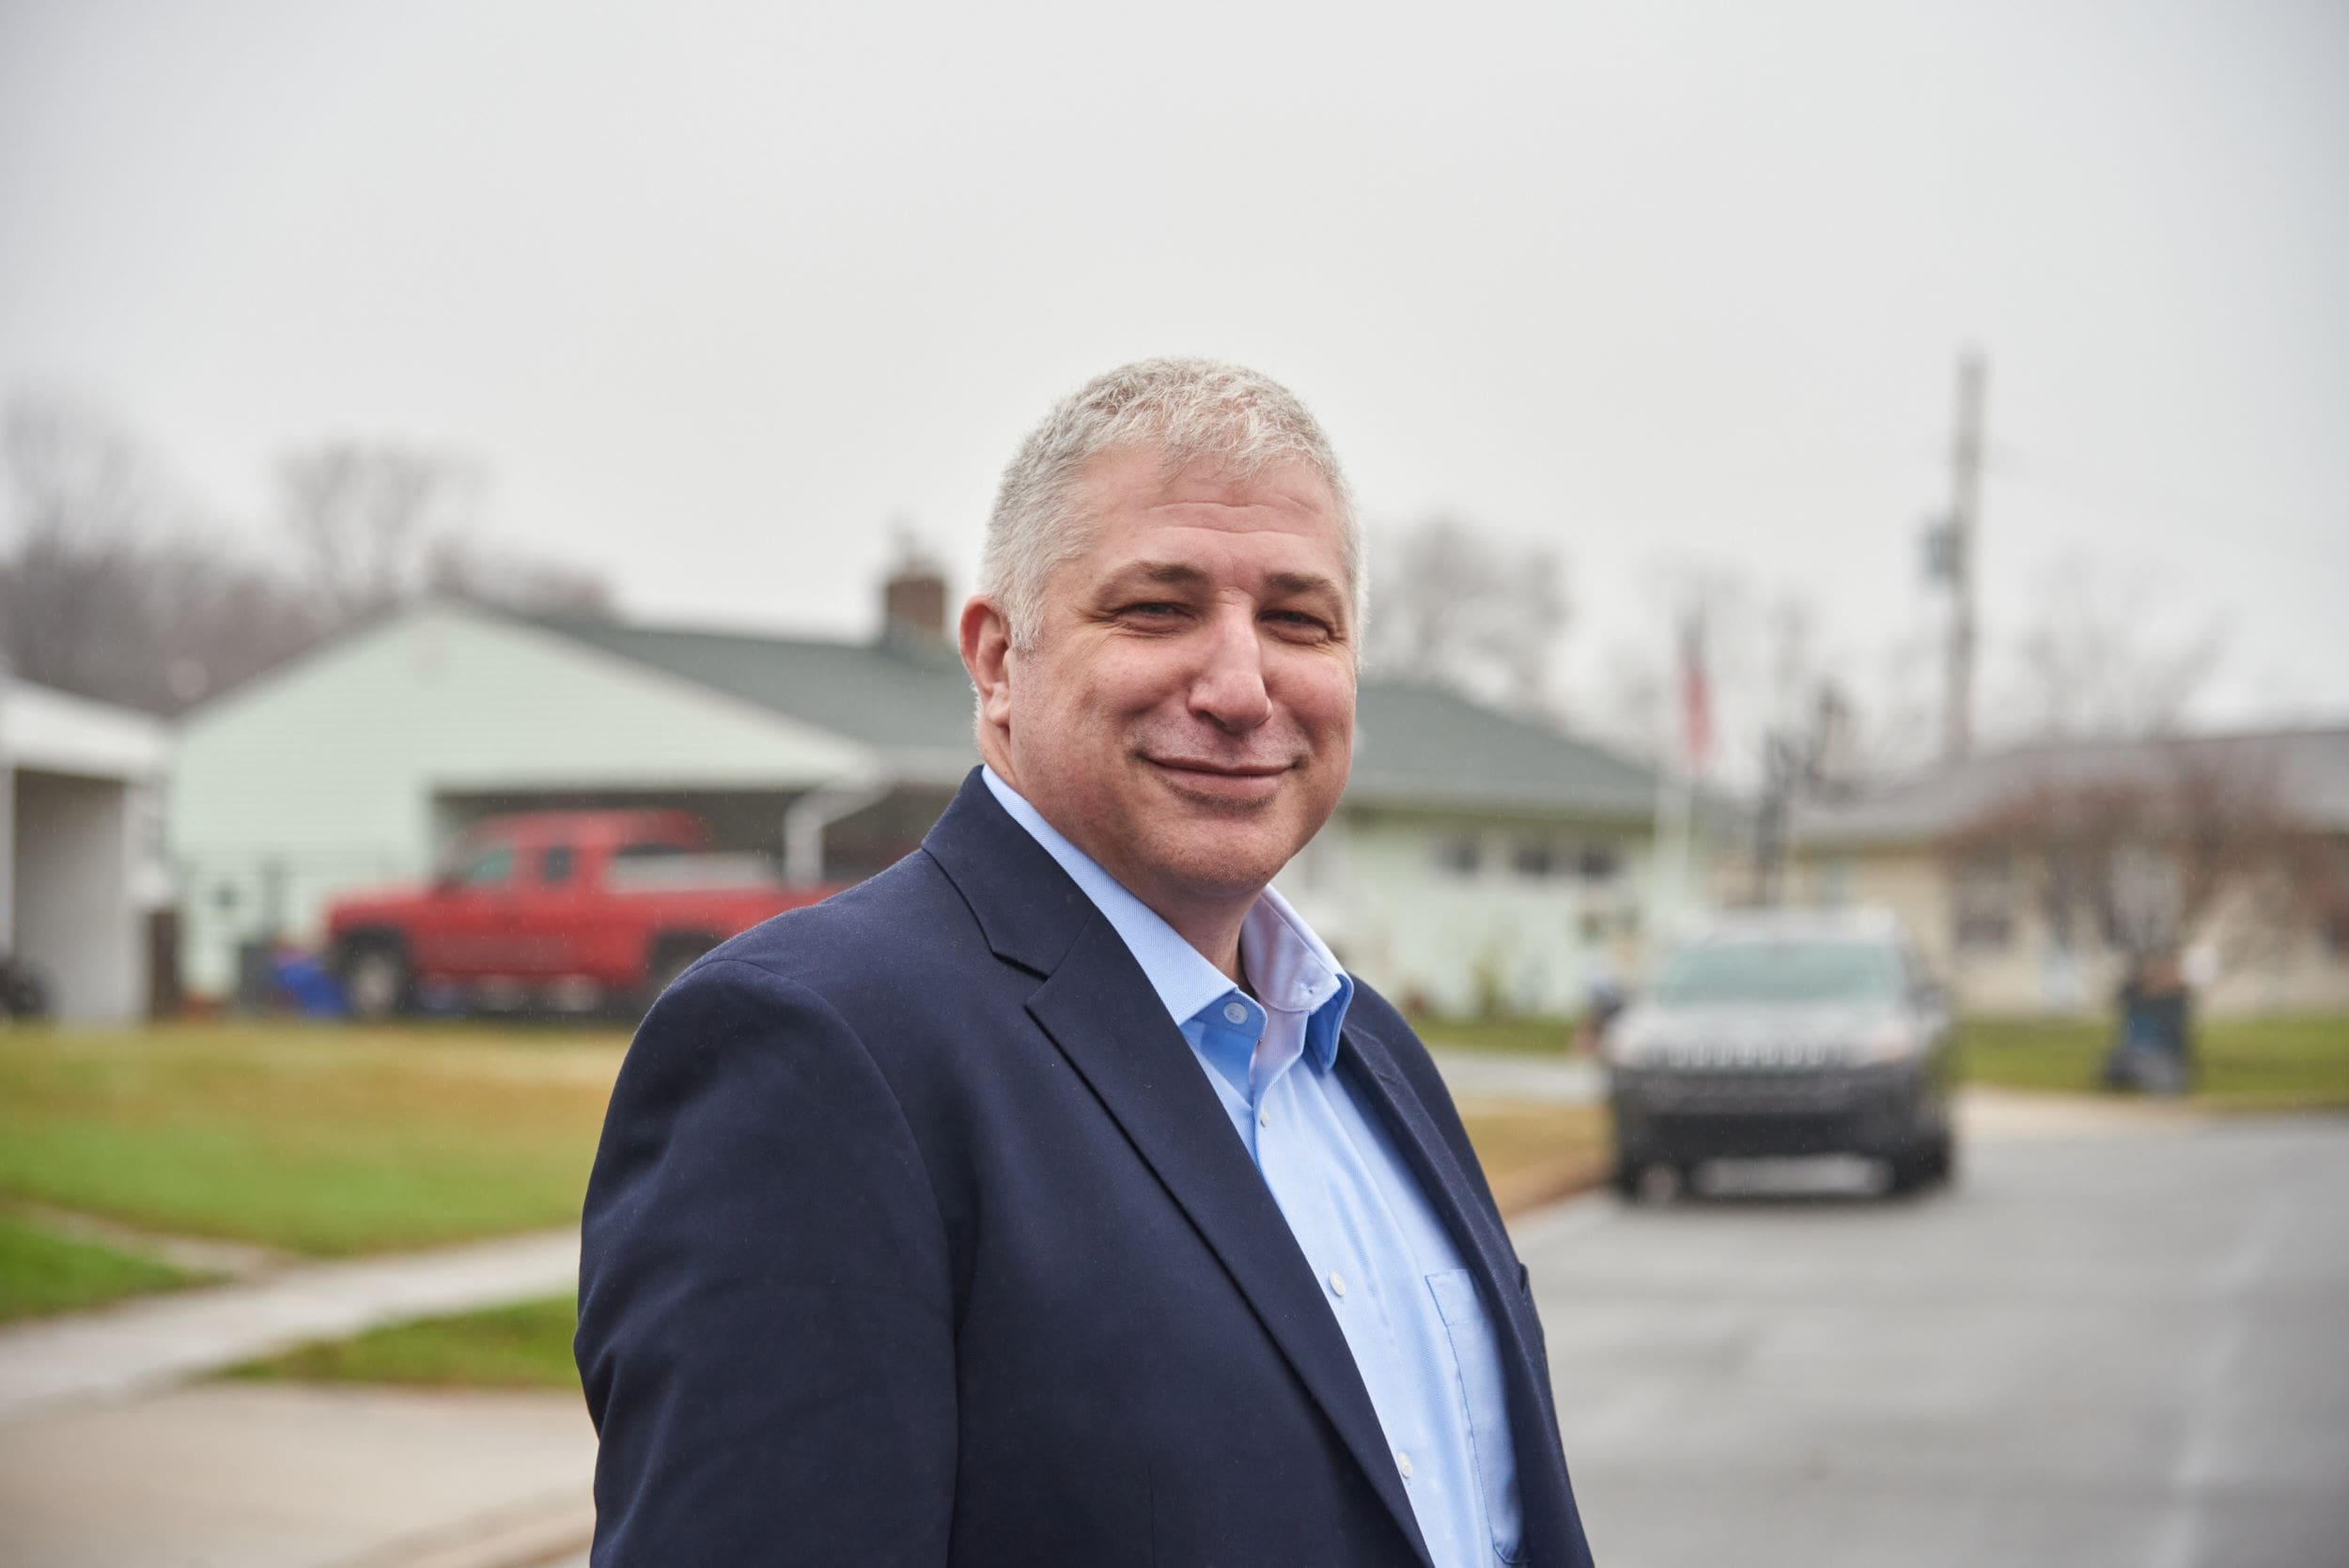 Jim Prokopiak, the Democratic candidate running in the Feb. 13, 2024 special election for the 140th state House District.